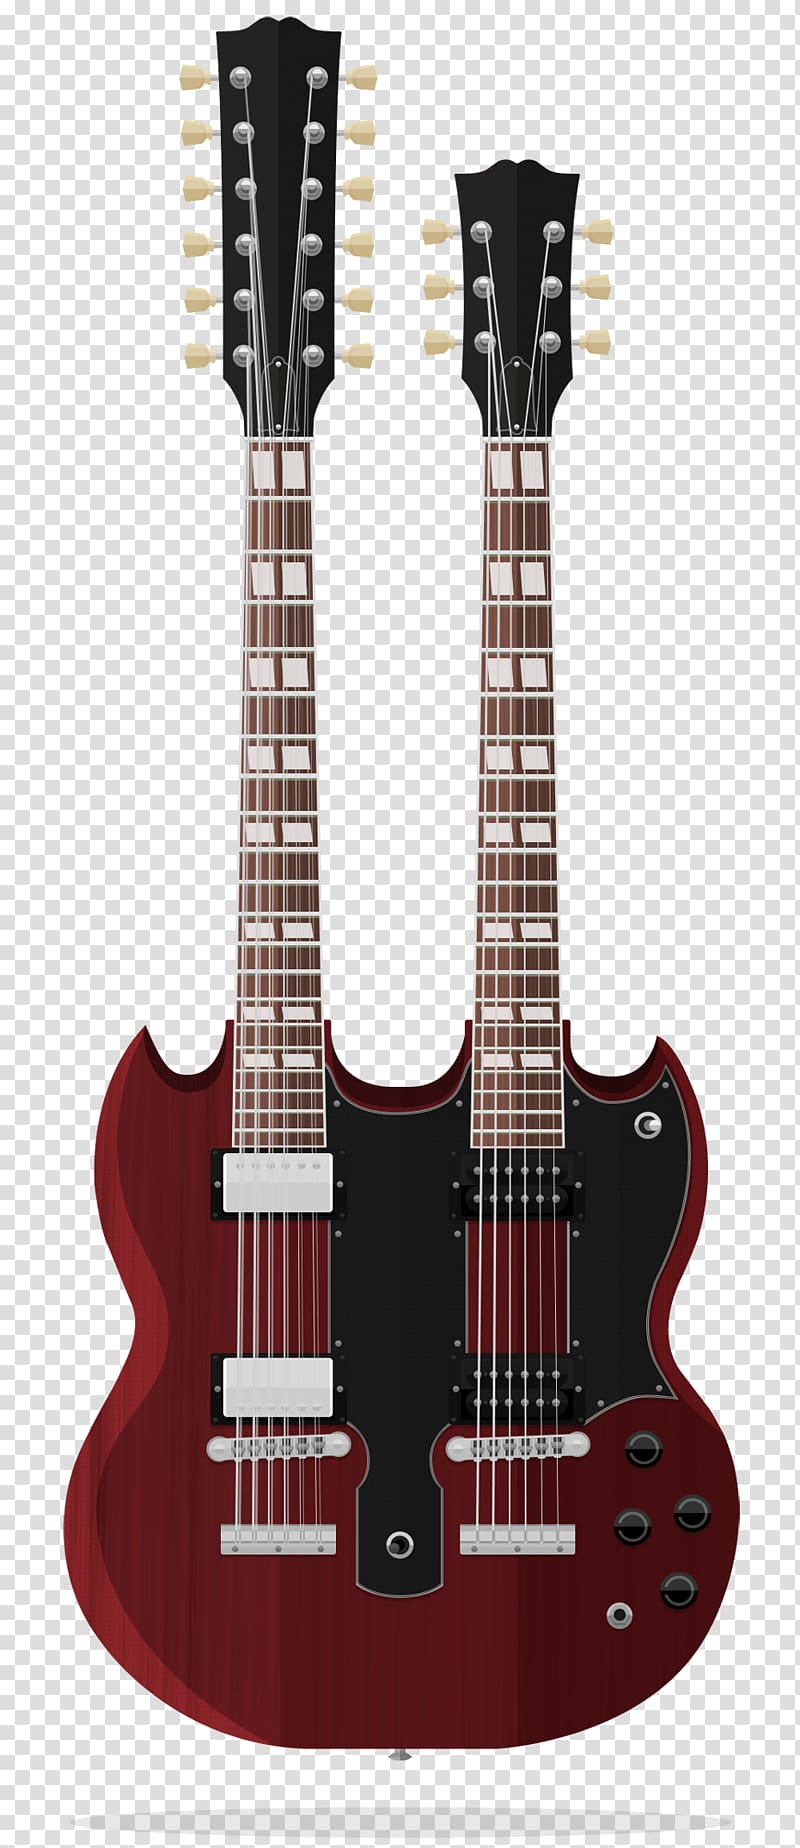 Electric guitar Gibson EDS-1275 Acoustic guitar Gibson Firebird Bass guitar, electric guitar transparent background PNG clipart